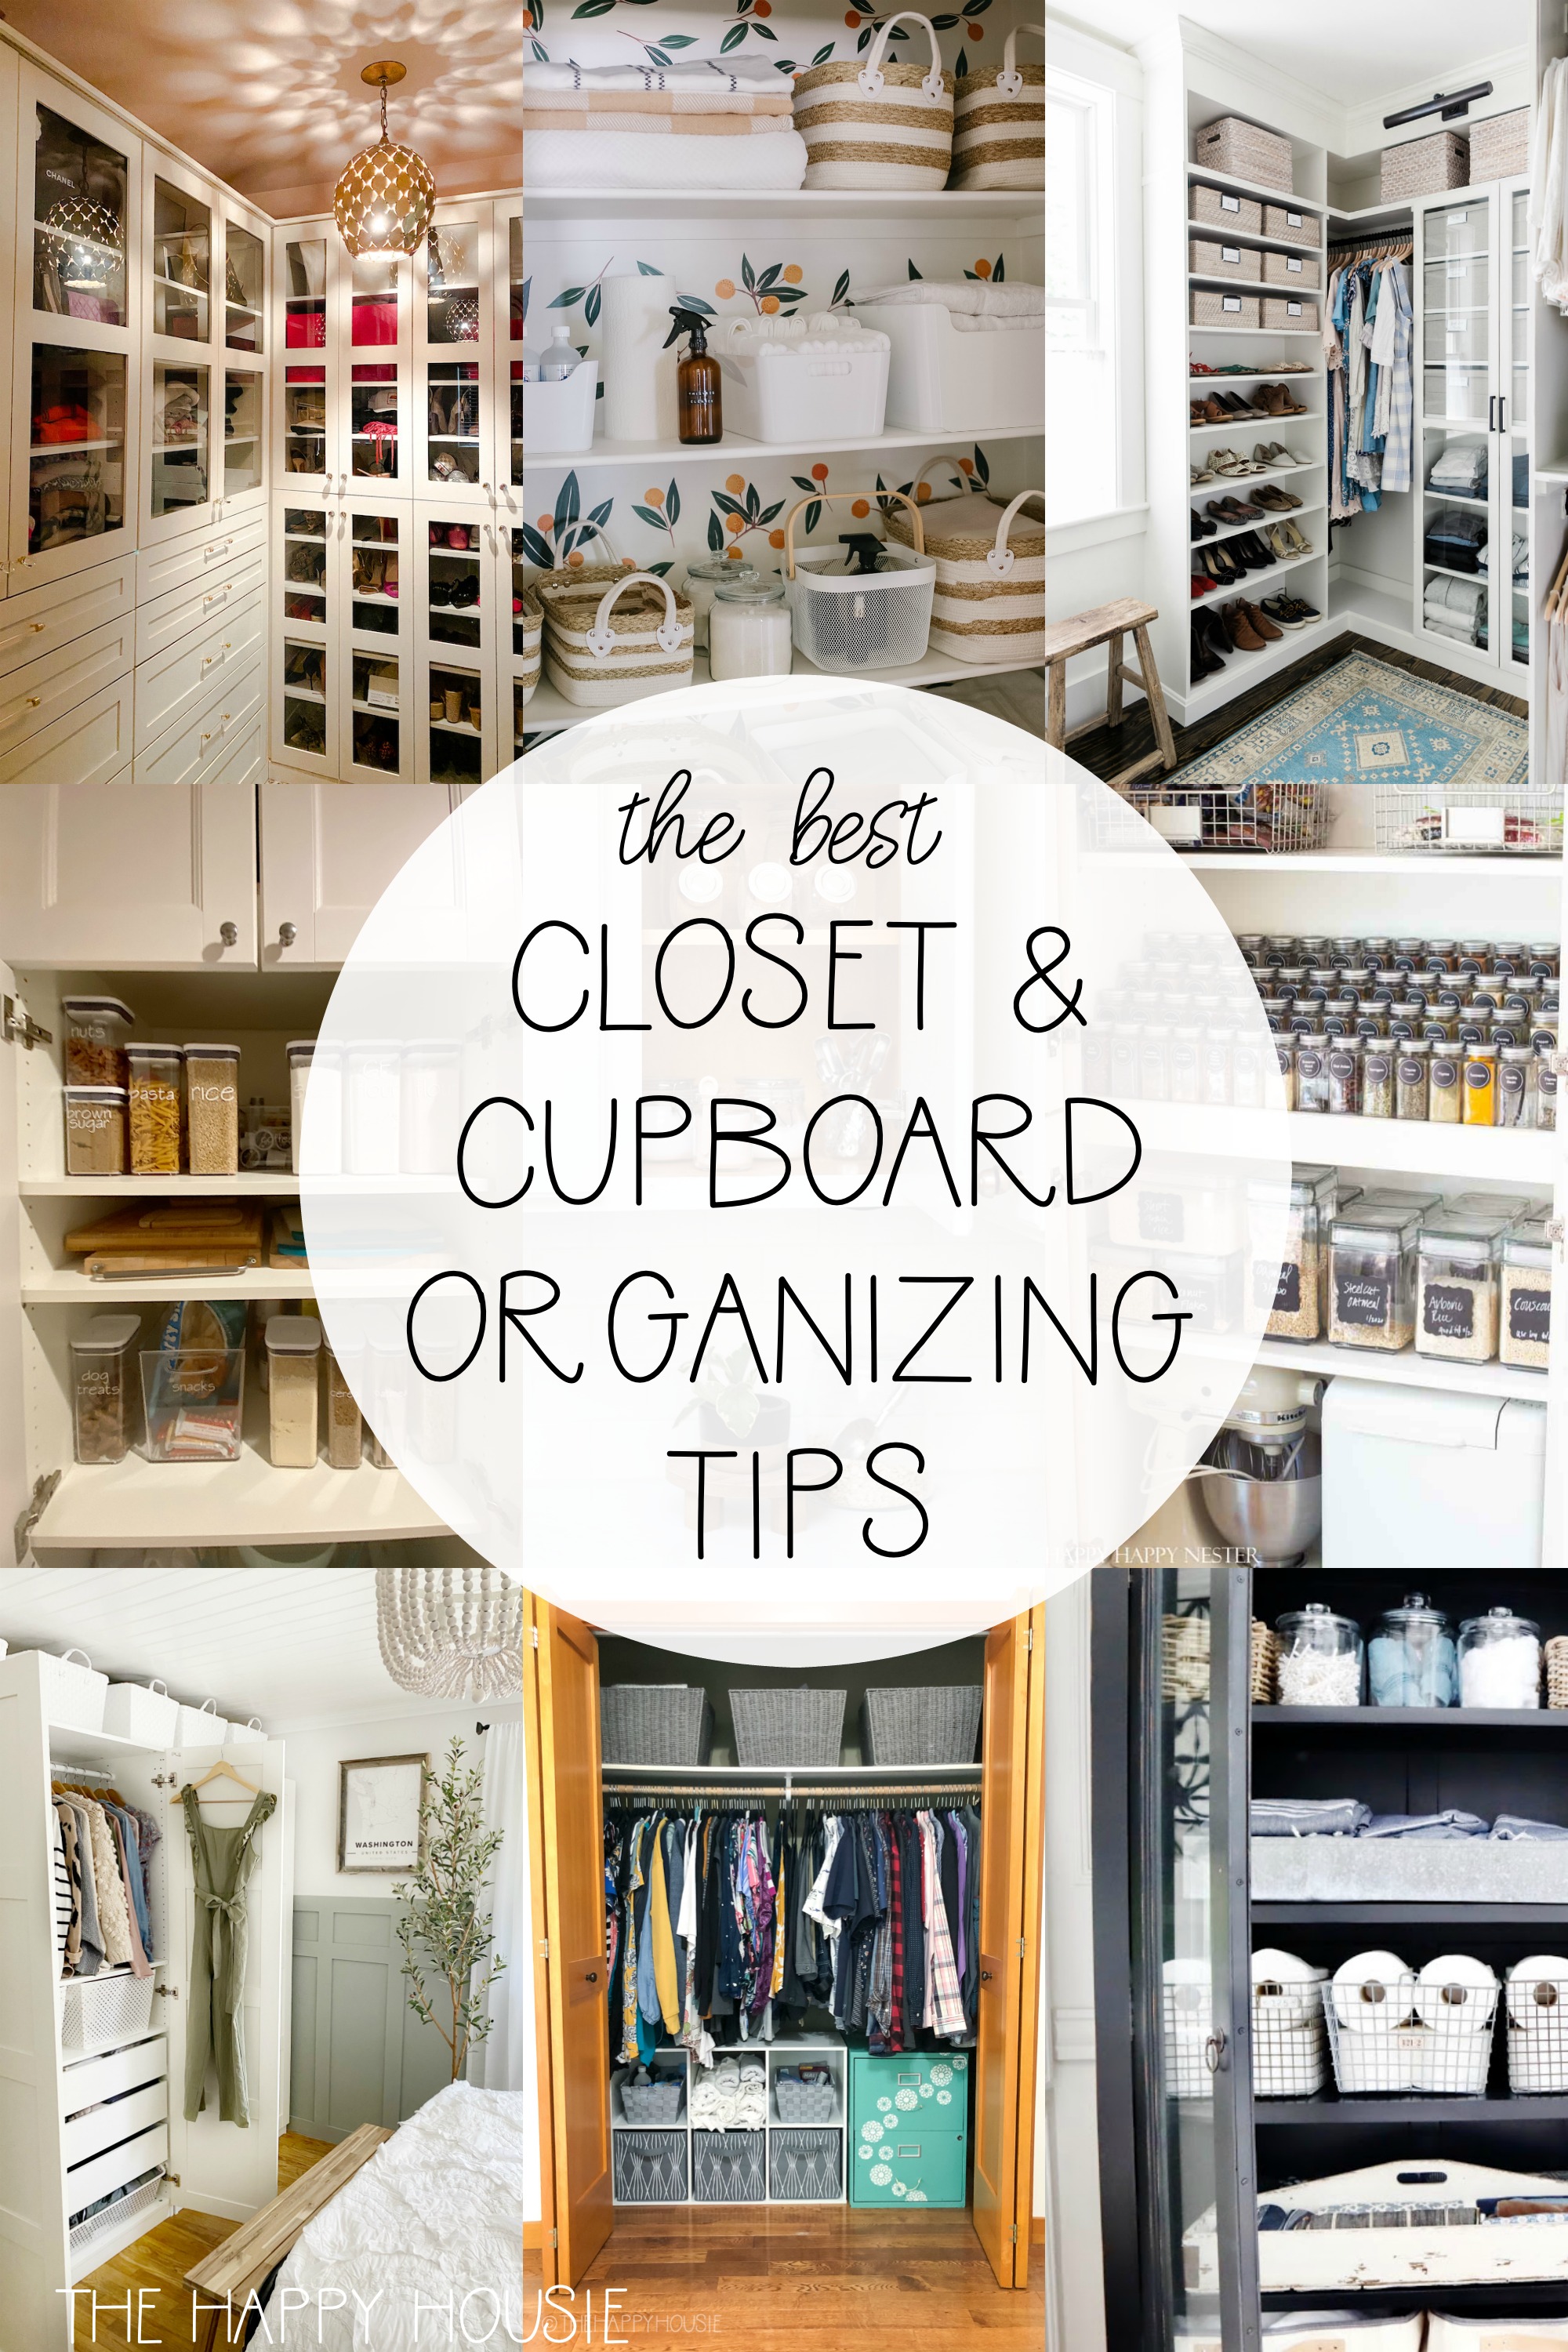 The Best Closet & Cupboard Organizing Tips poster.